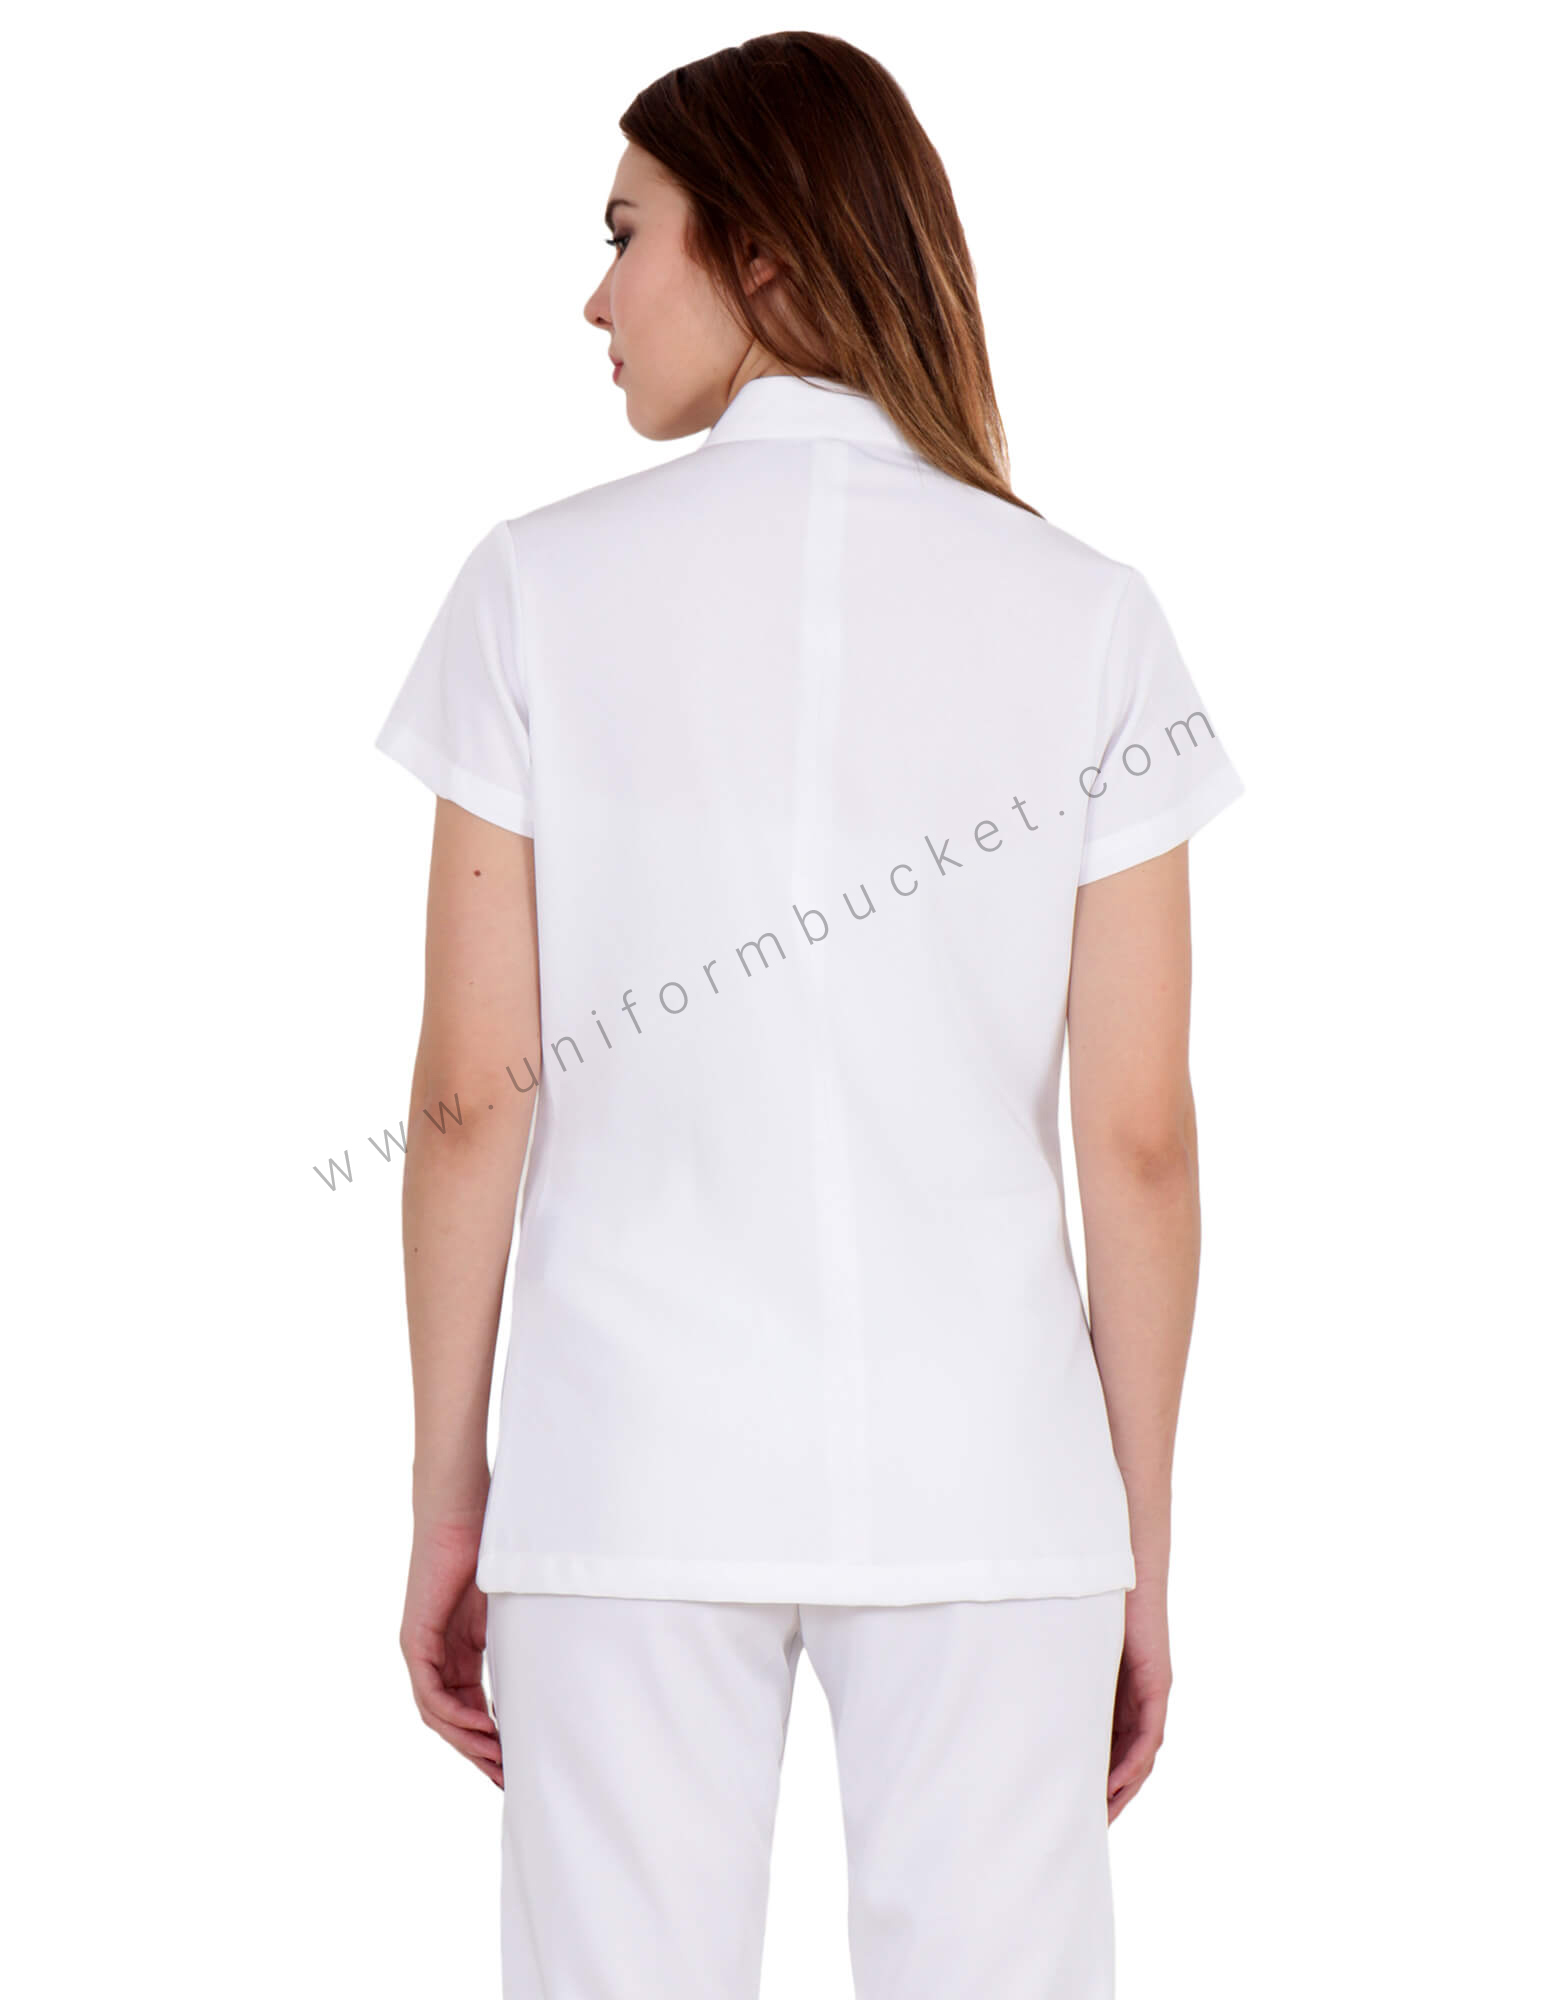 Buy White Trousers for Women Online in India on Libas